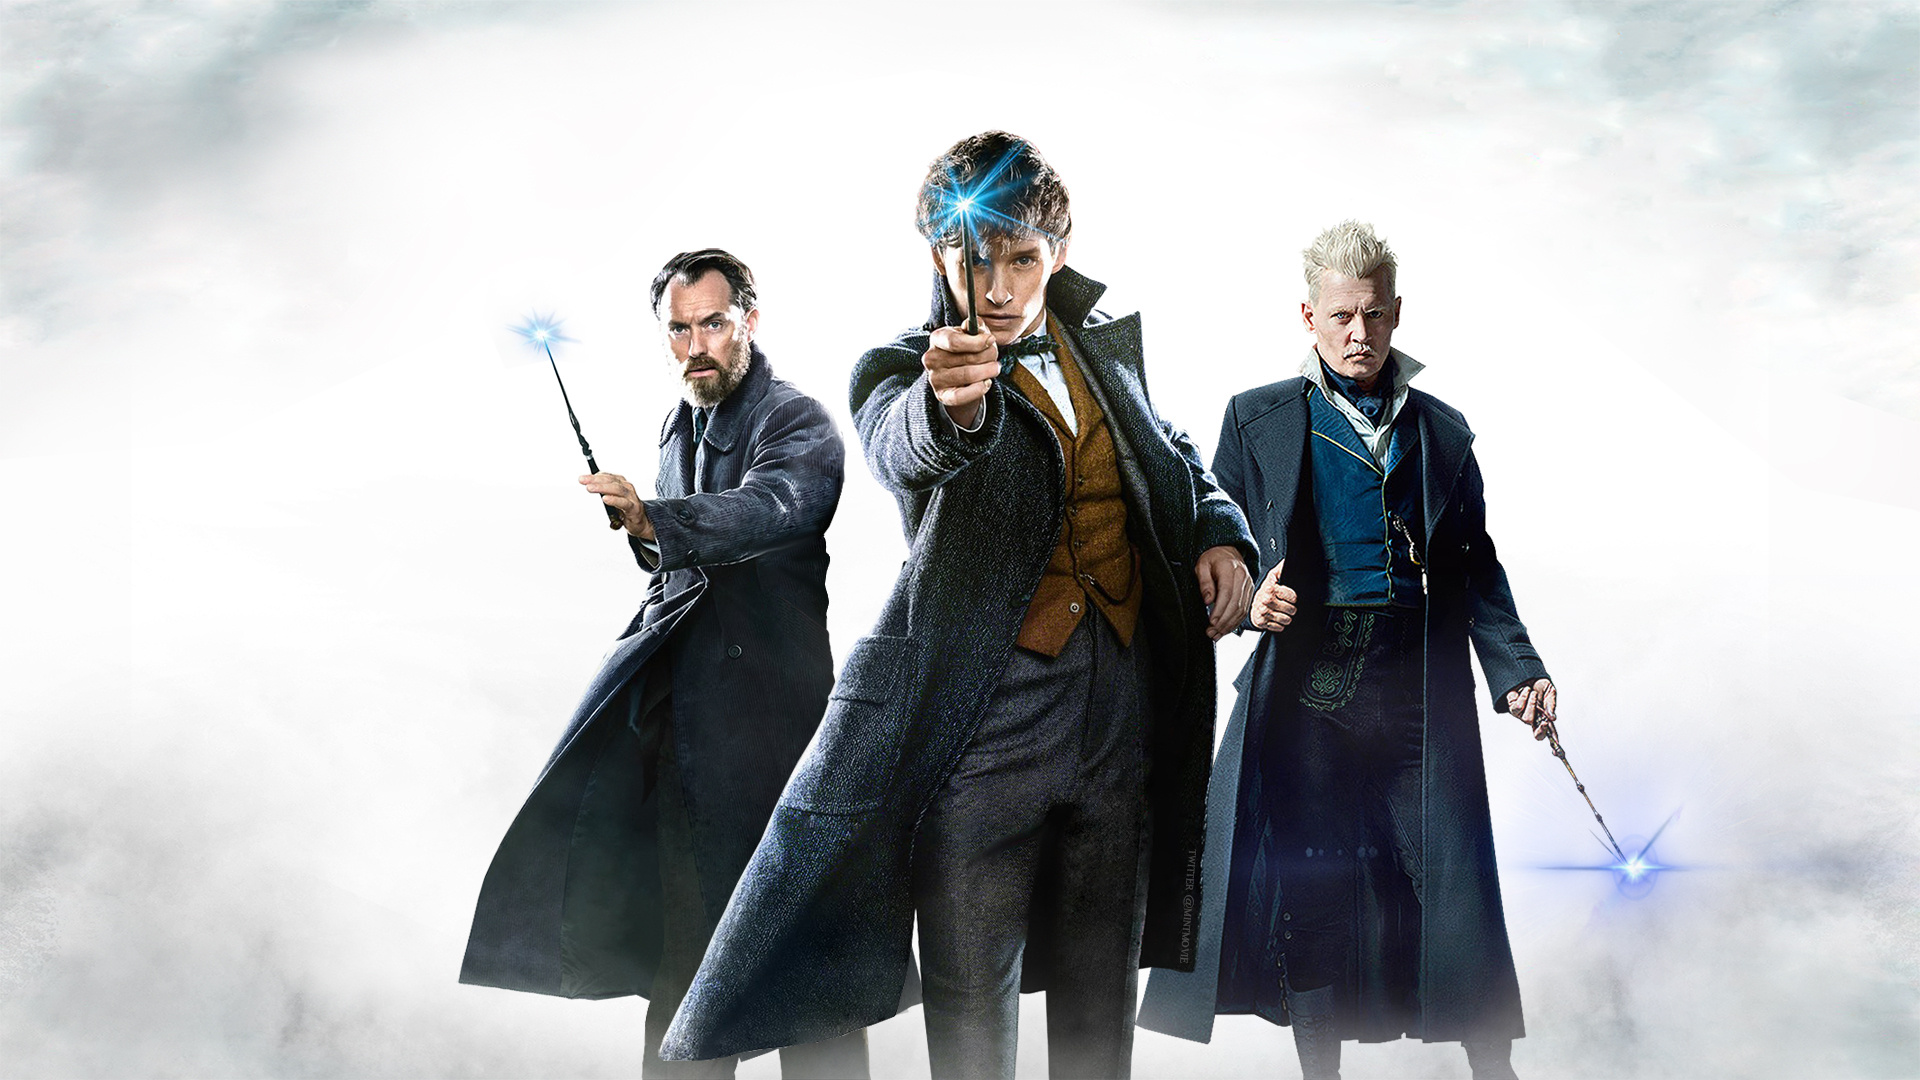 Fantastic Beasts, Crimes of Grindelwald movie, HD wallpapers, Photos and pictures, 1920x1080 Full HD Desktop